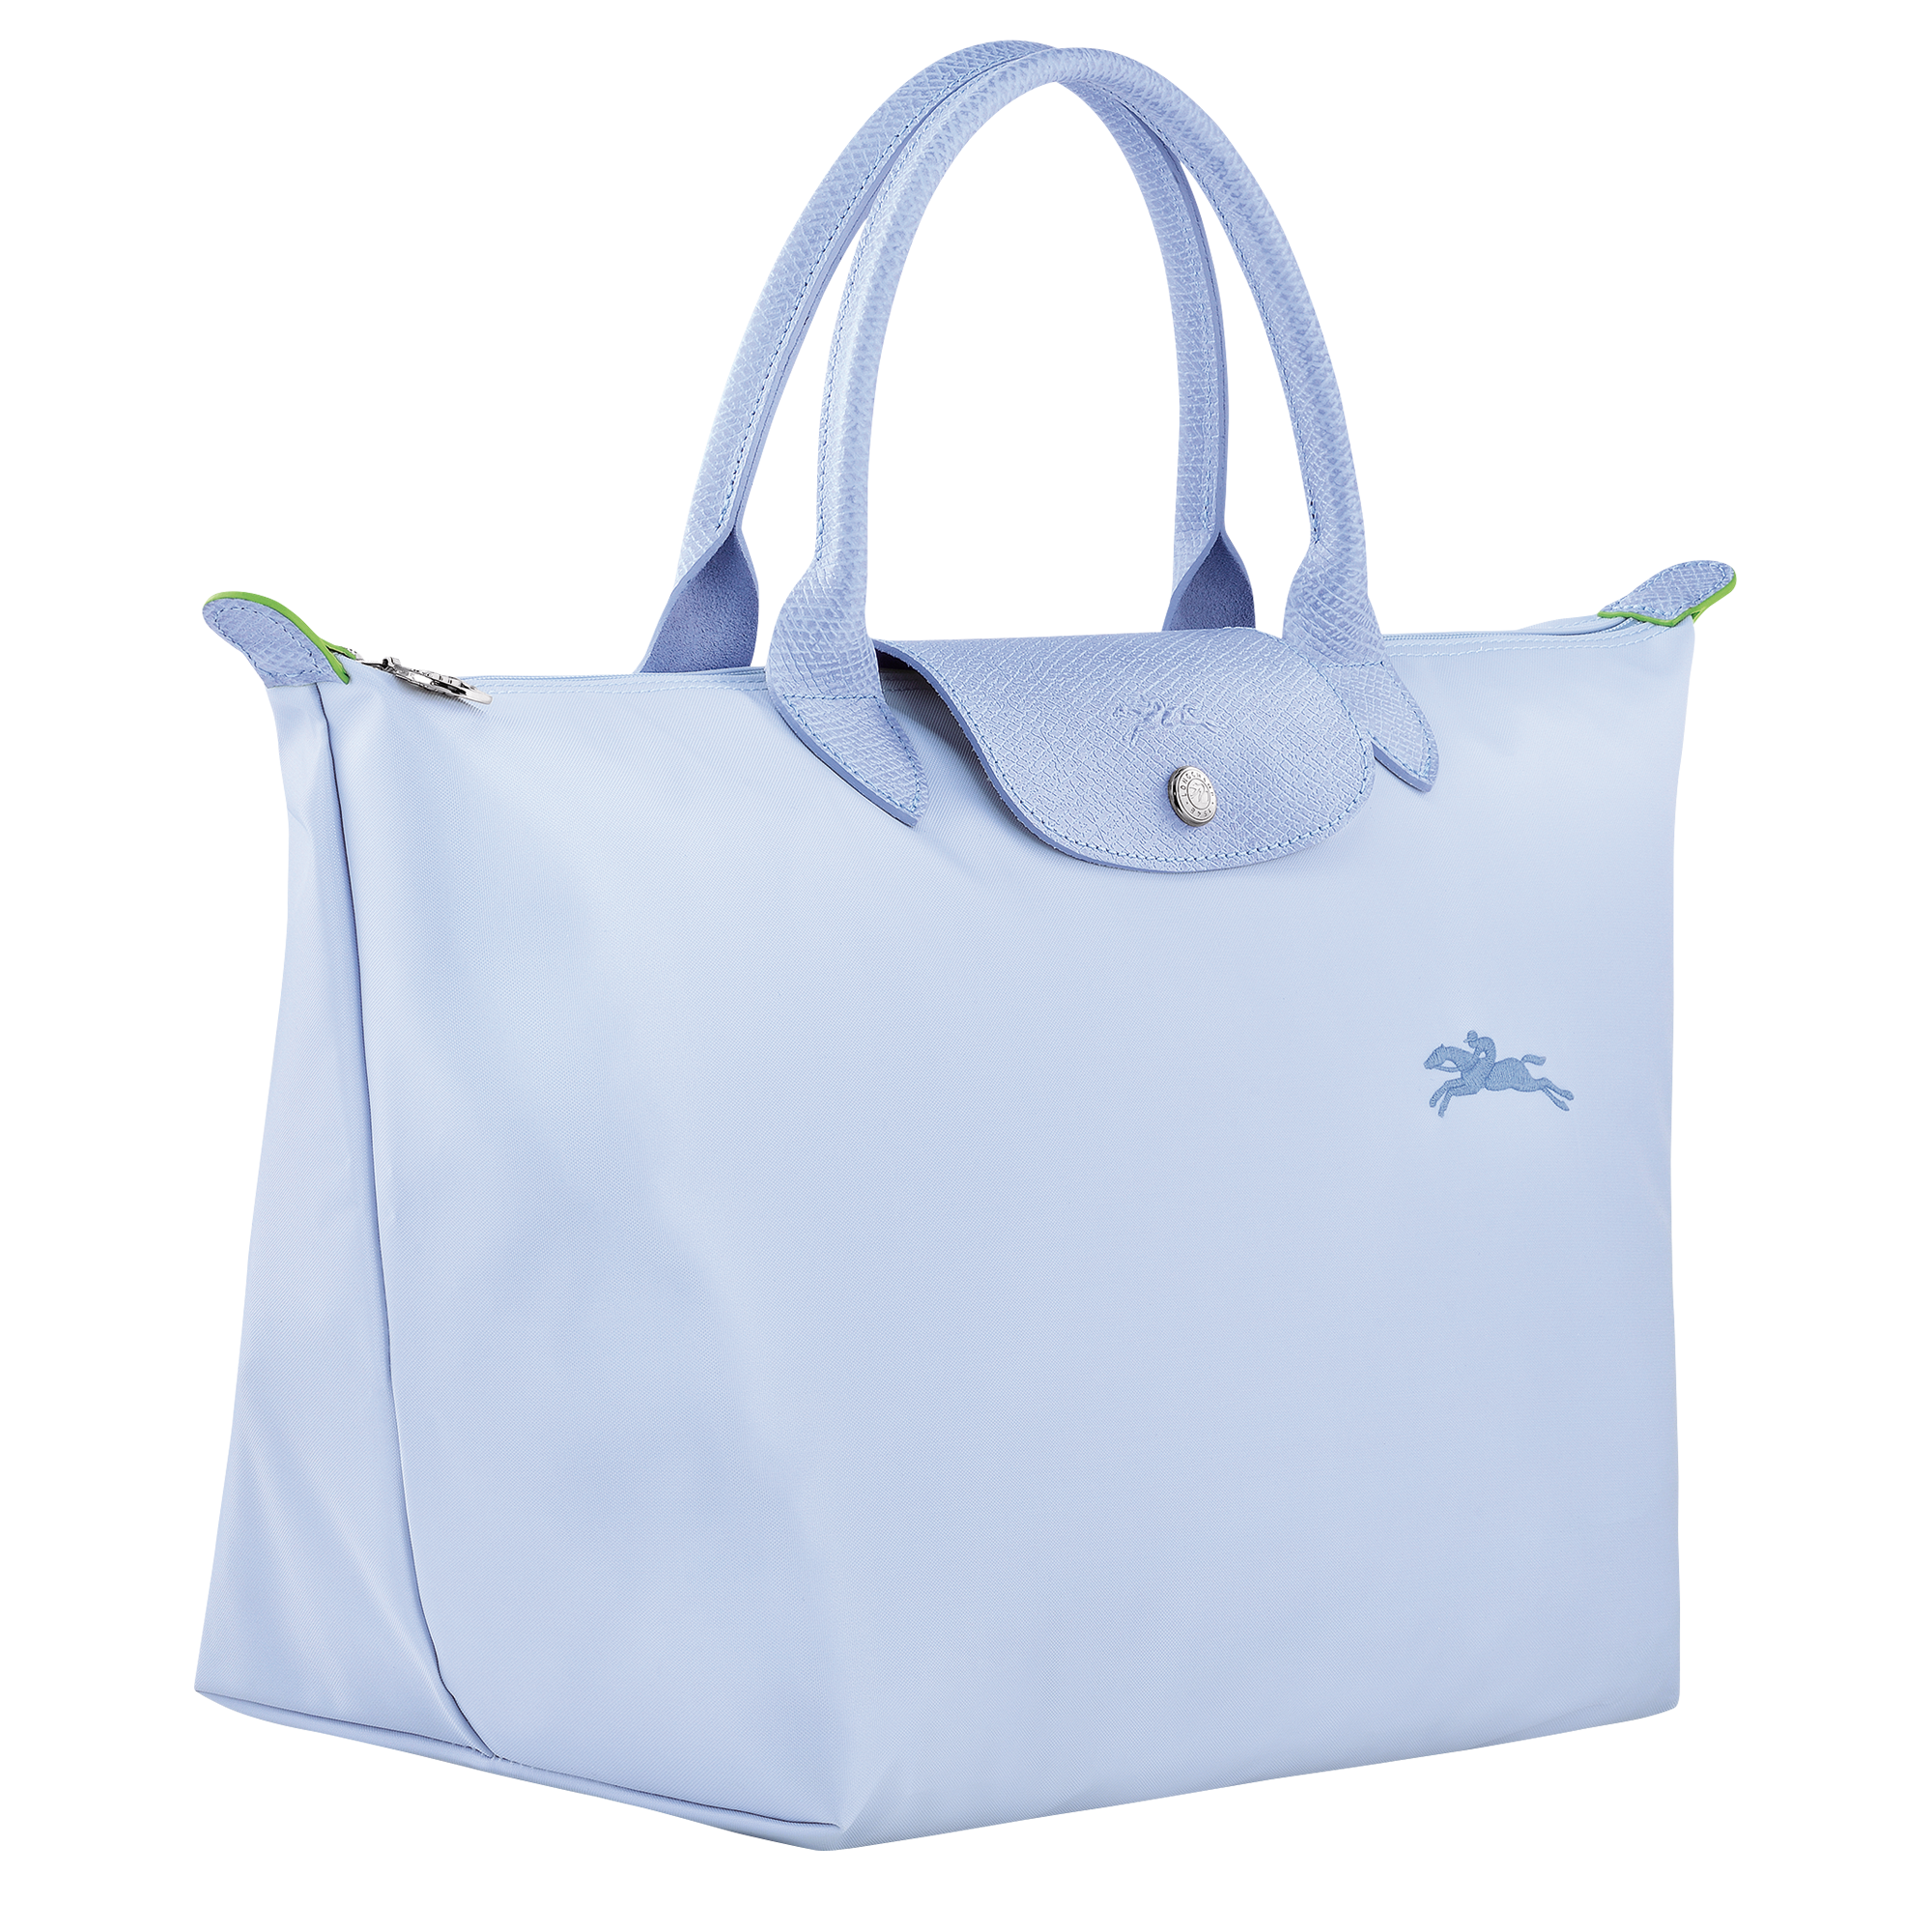 Longchamp pouch with handle in Sky Blue